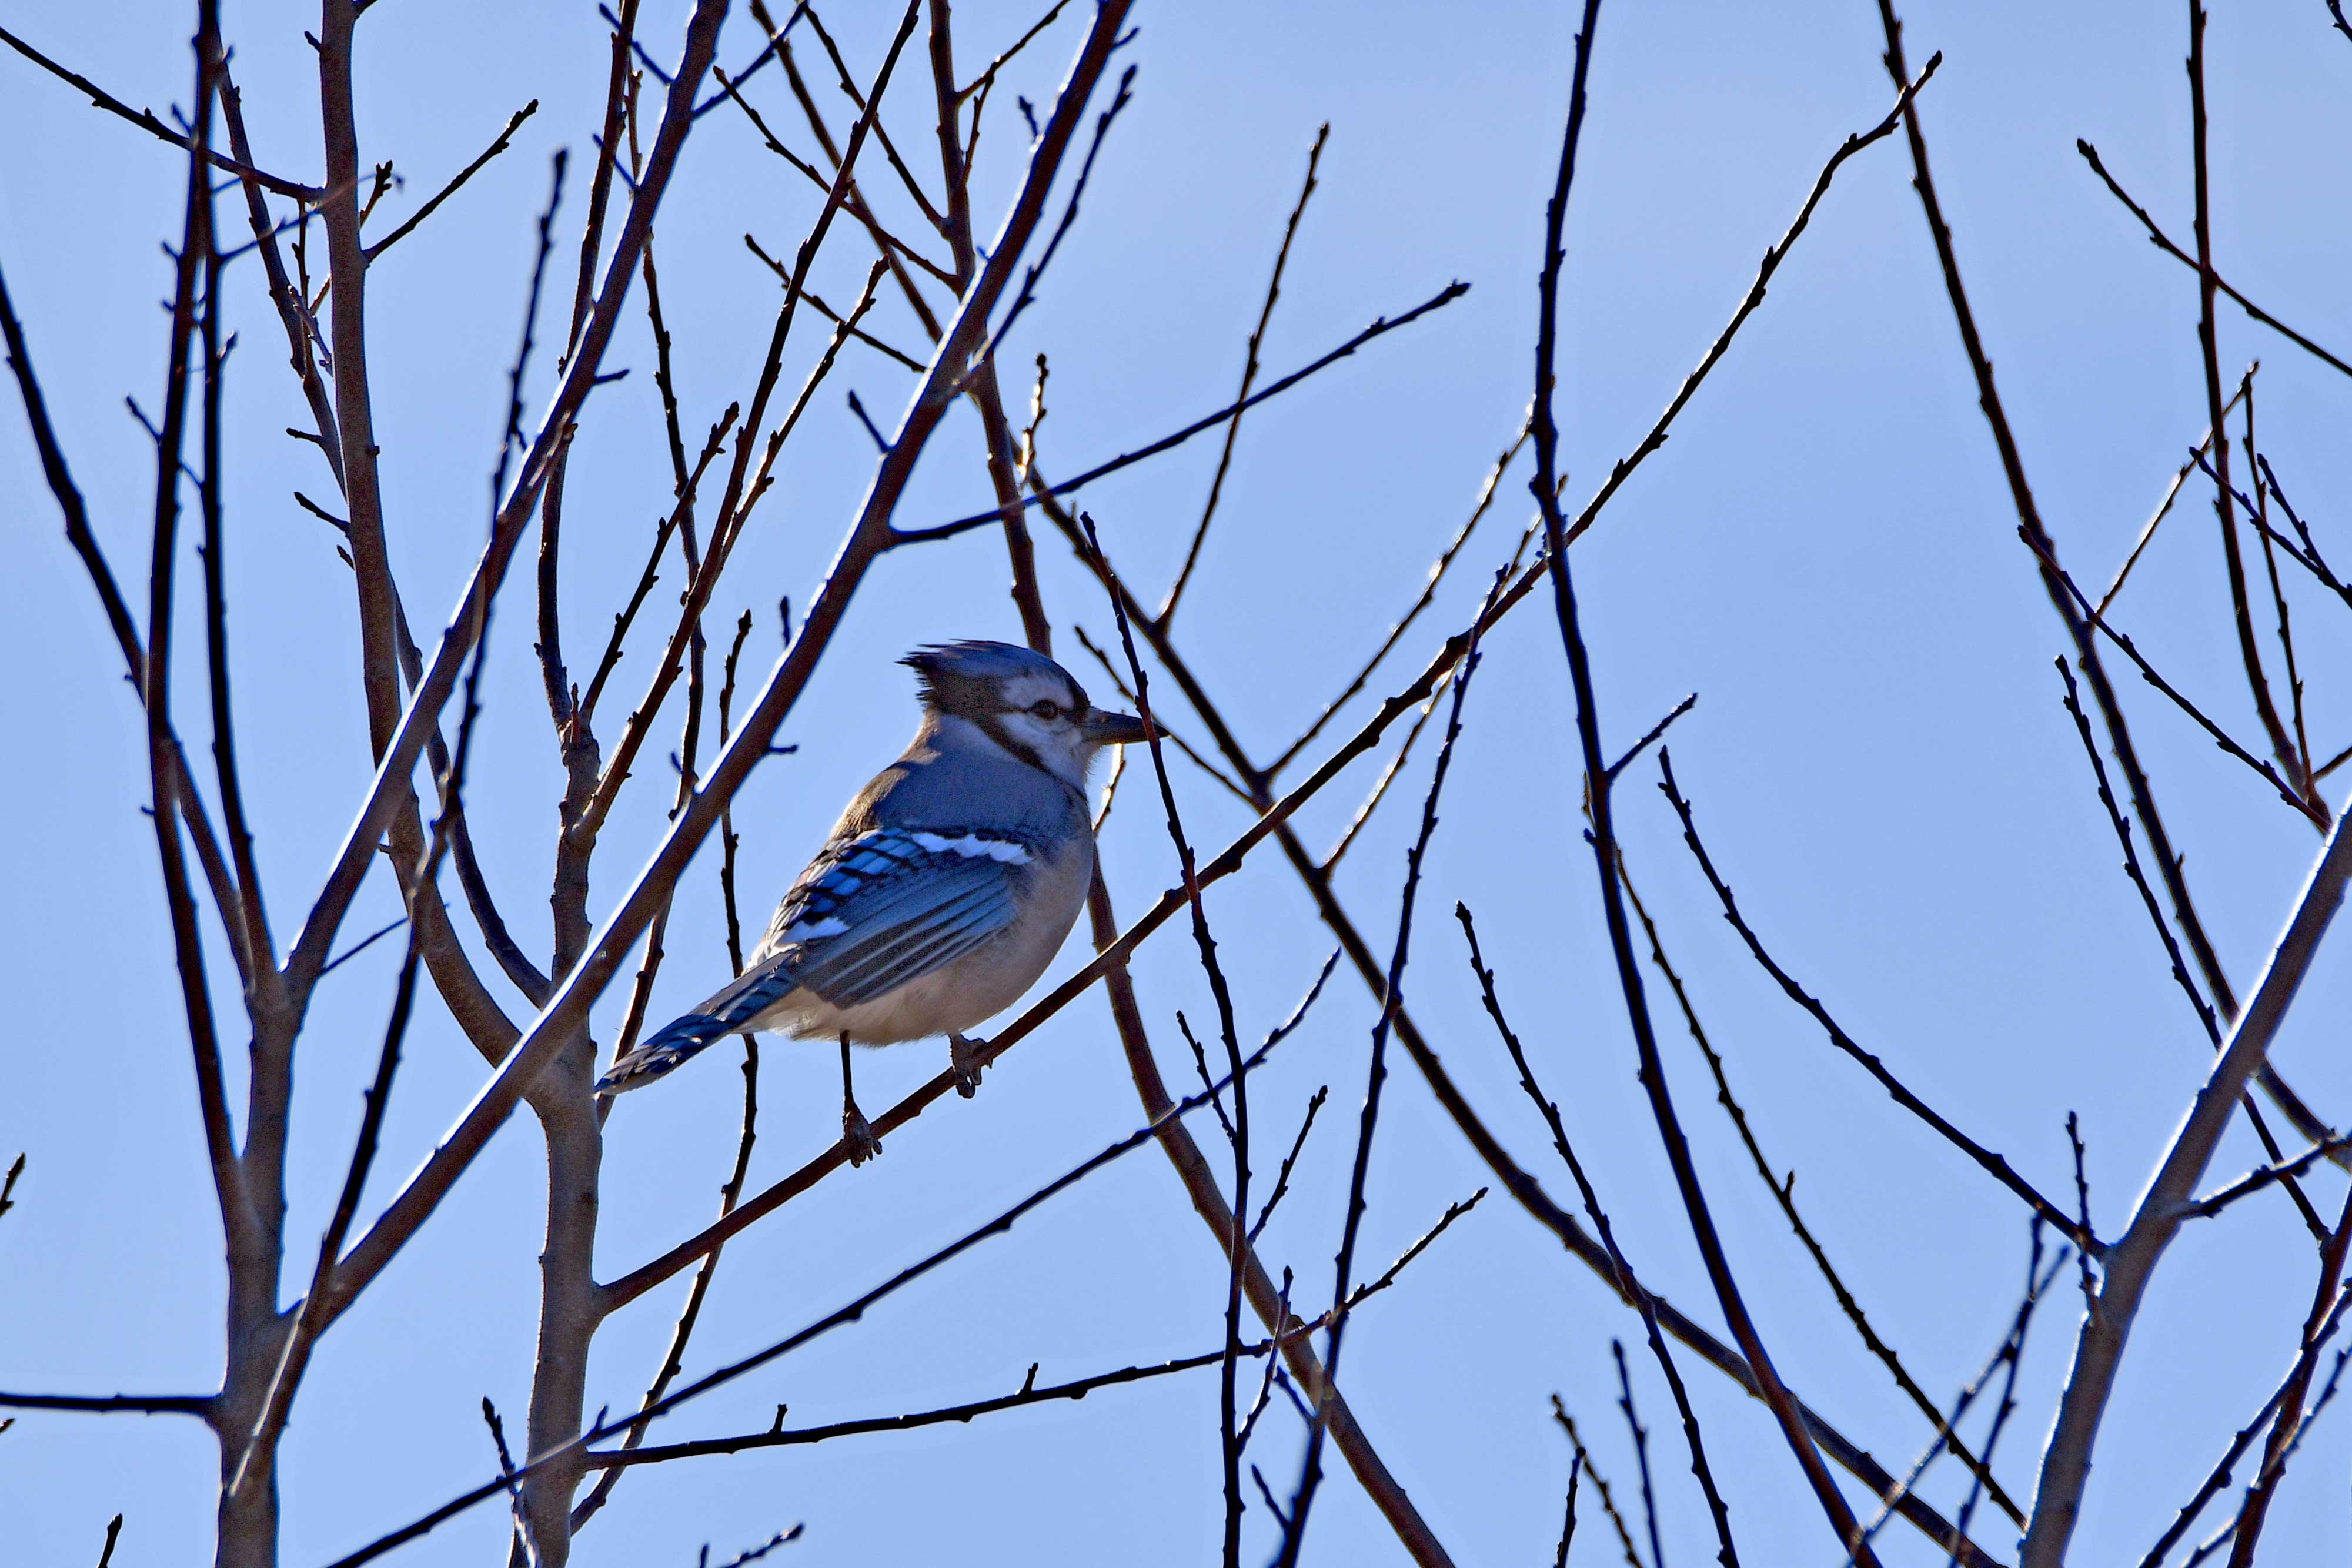 A blue jay in a bare tree